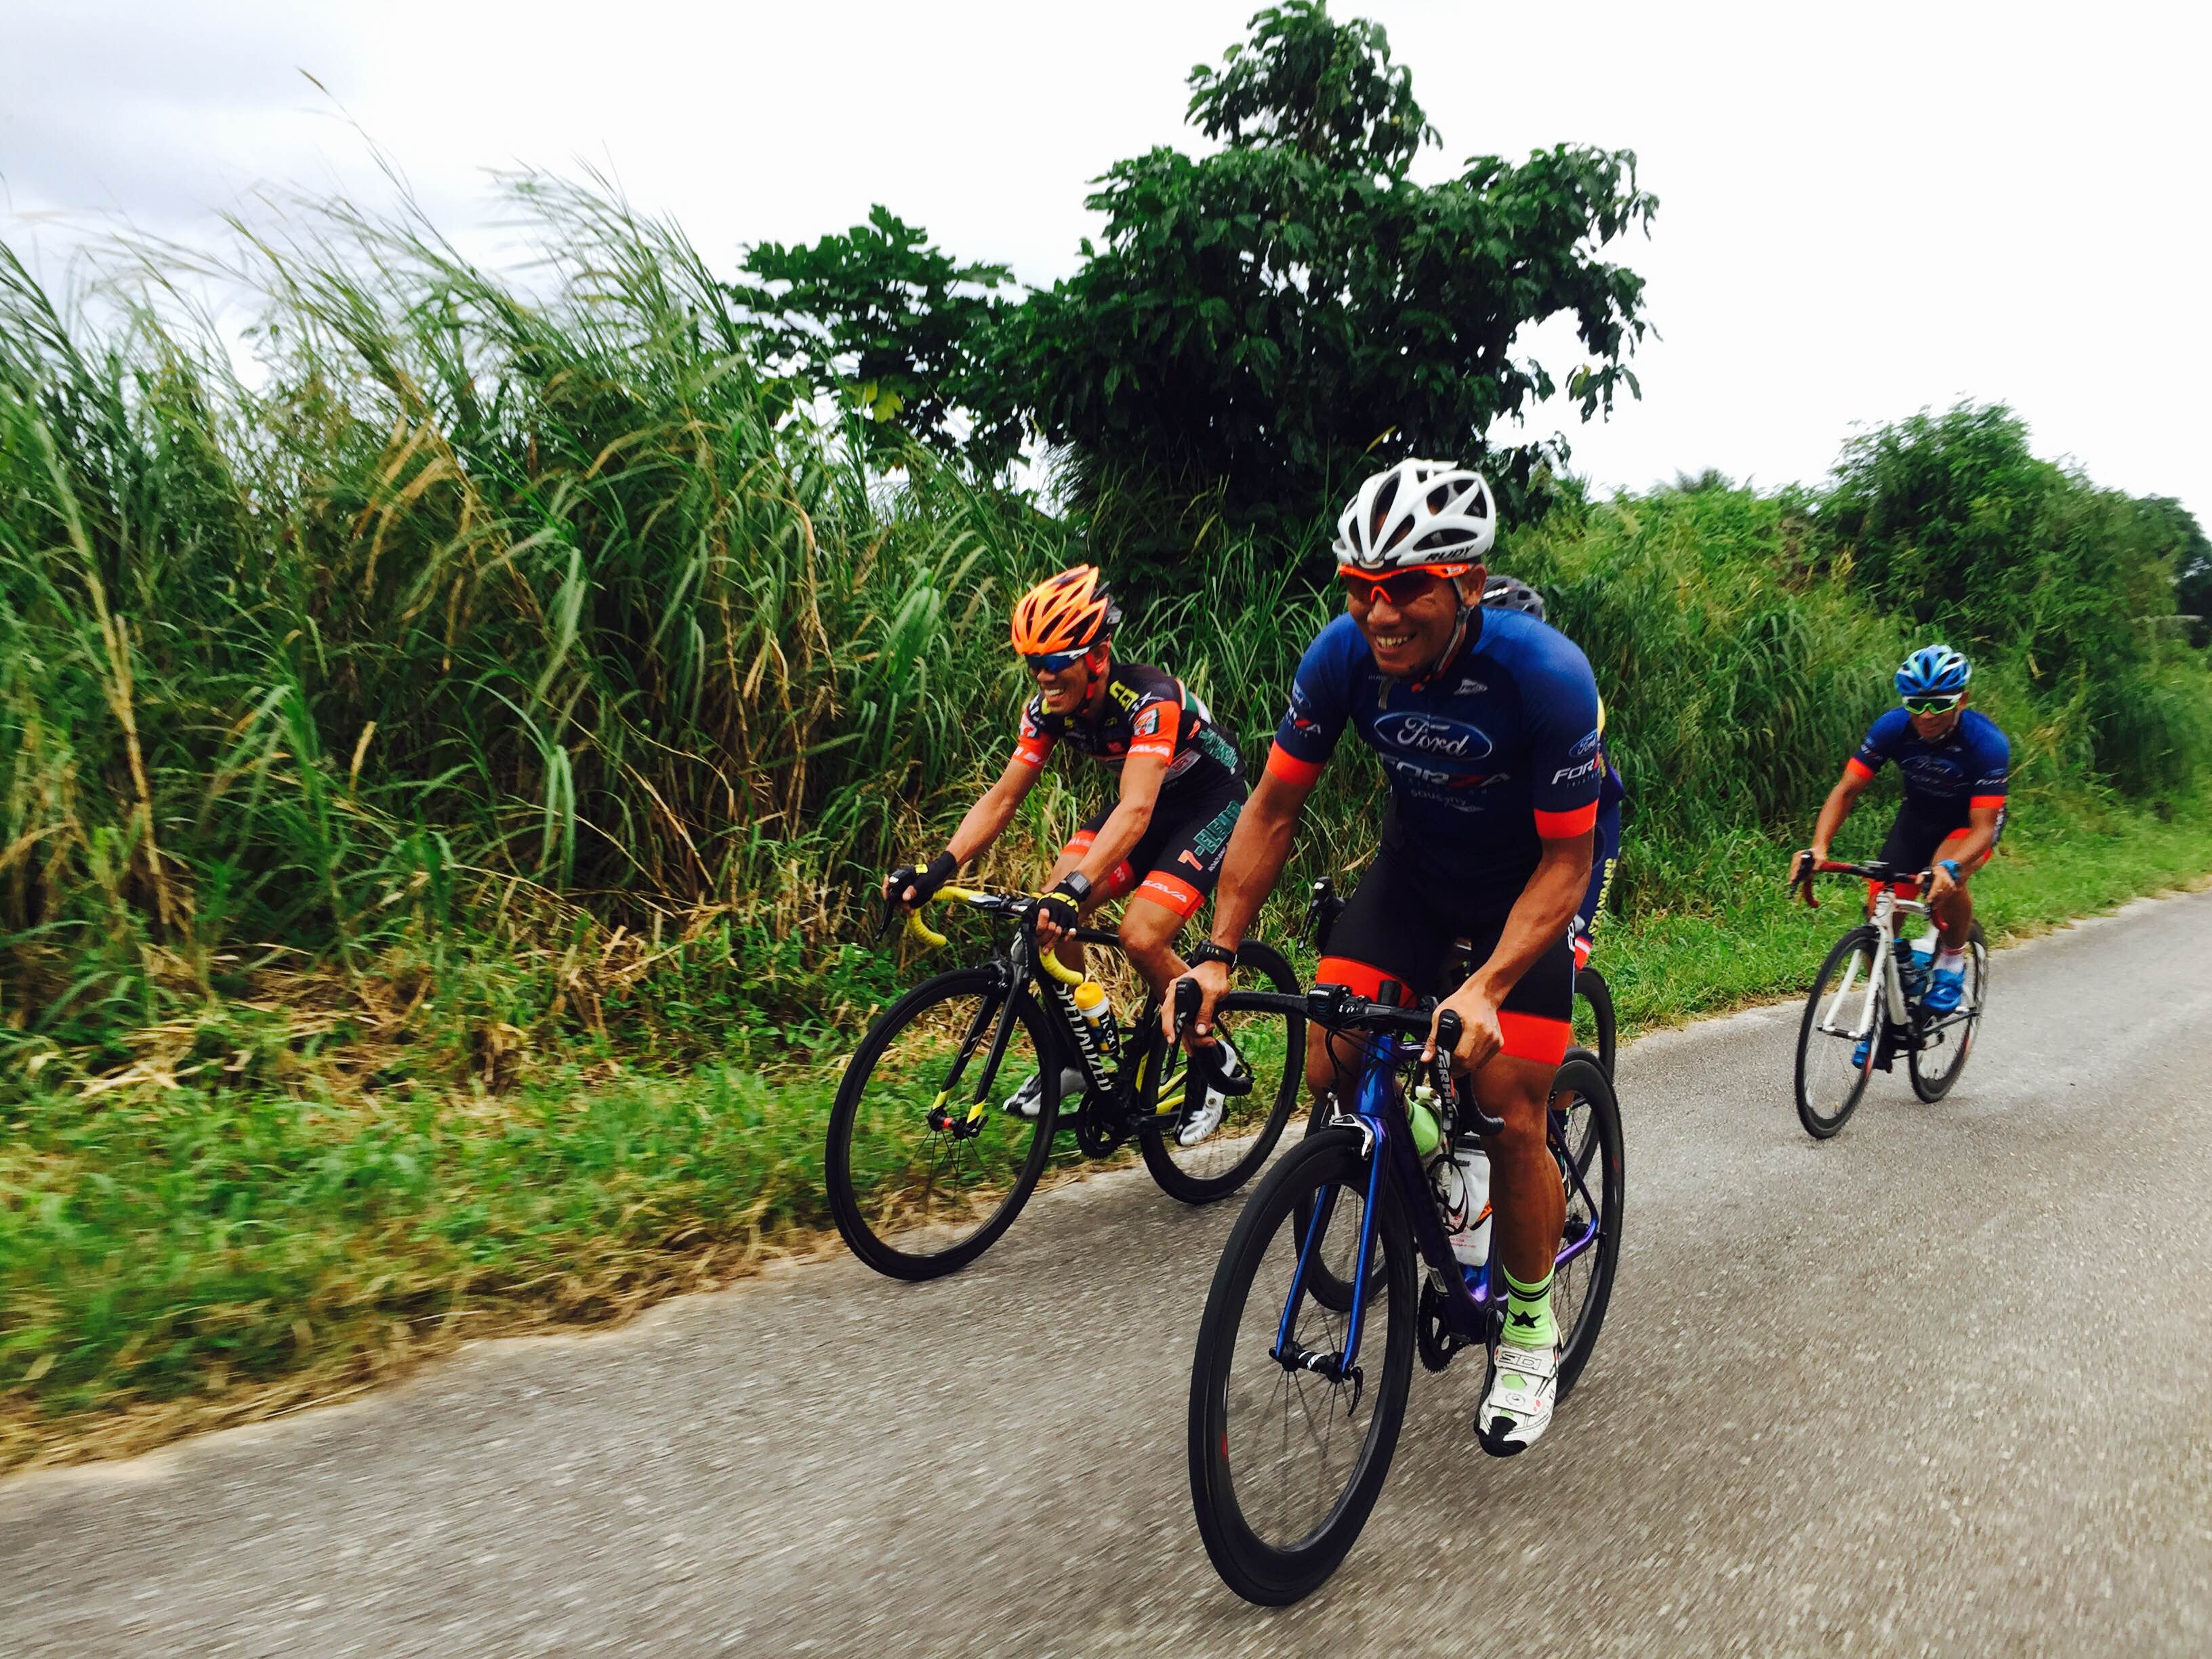 Mark Galedo, Jan Morales and Joe Miller test the course two days before the Hell of Marianas race.